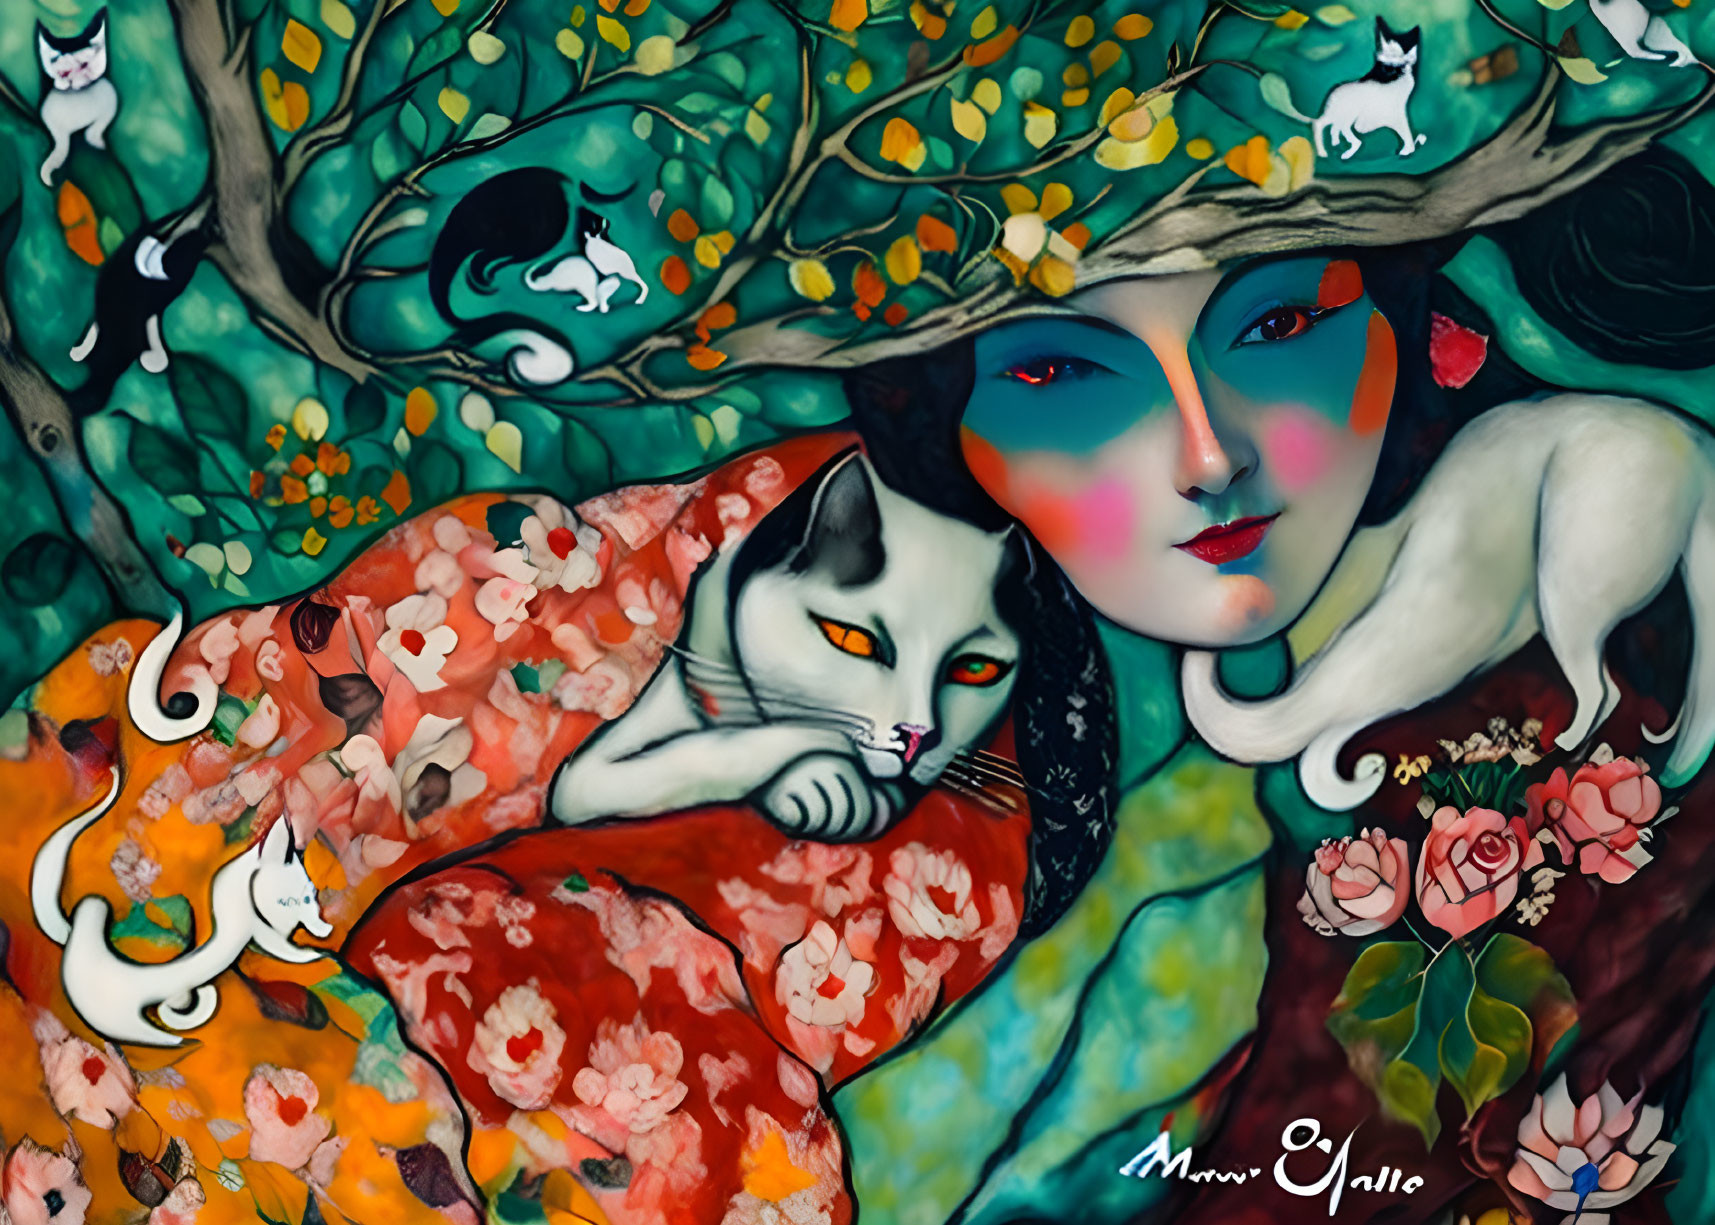 Surreal illustration of woman with mask face embraced by cat amid floral patterns